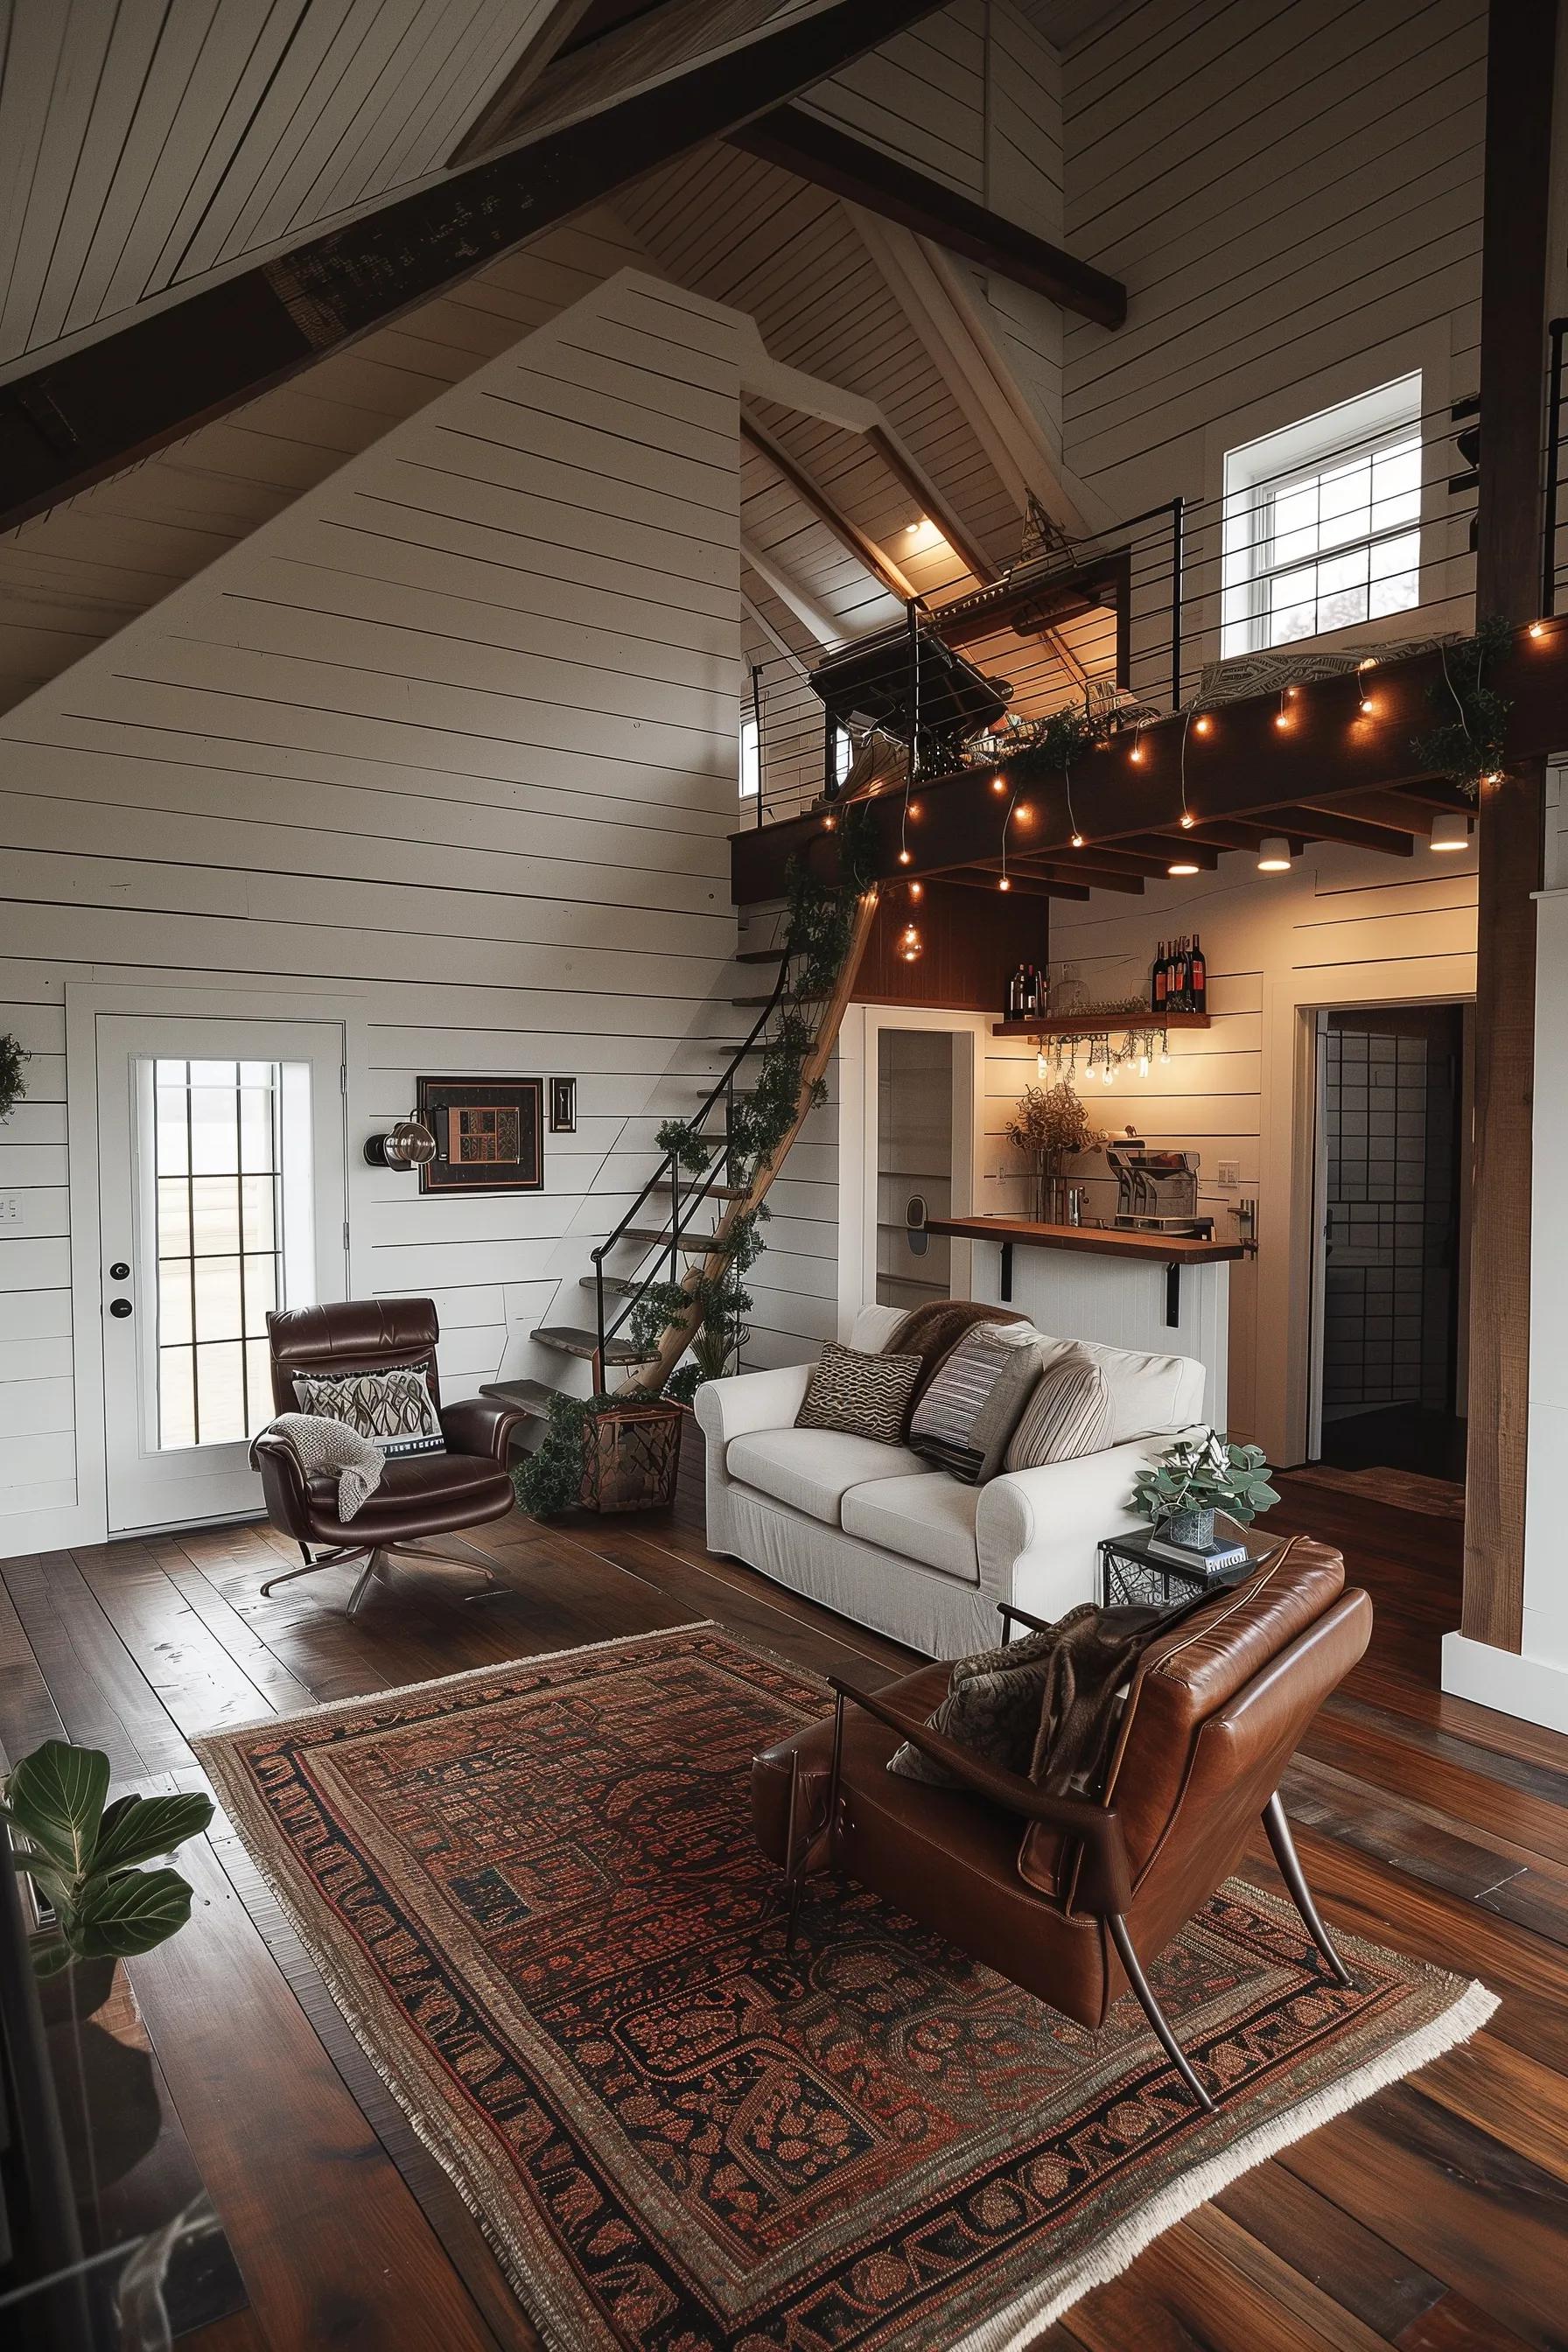 A pole barn with leather chairs and green plants wrapping around the stairs